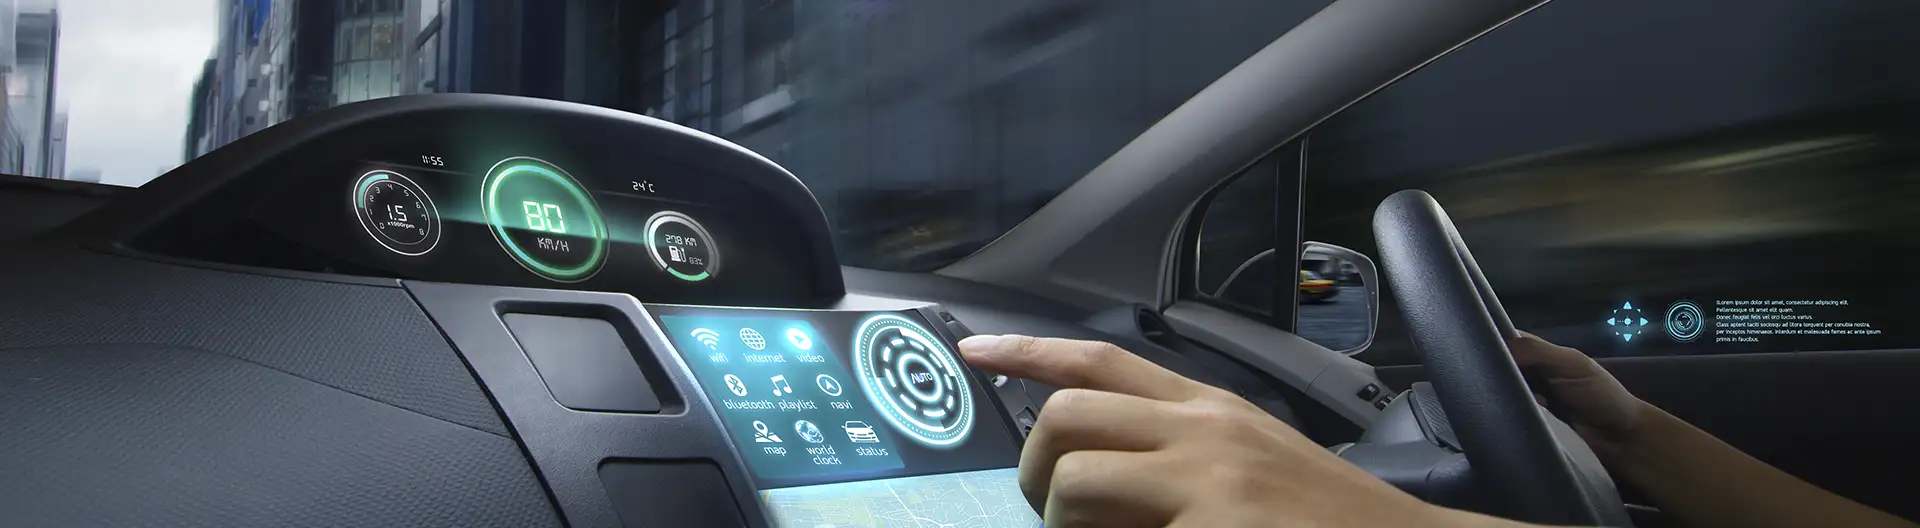 Building Infotainment System Powered by Android Automotive OS - Banner